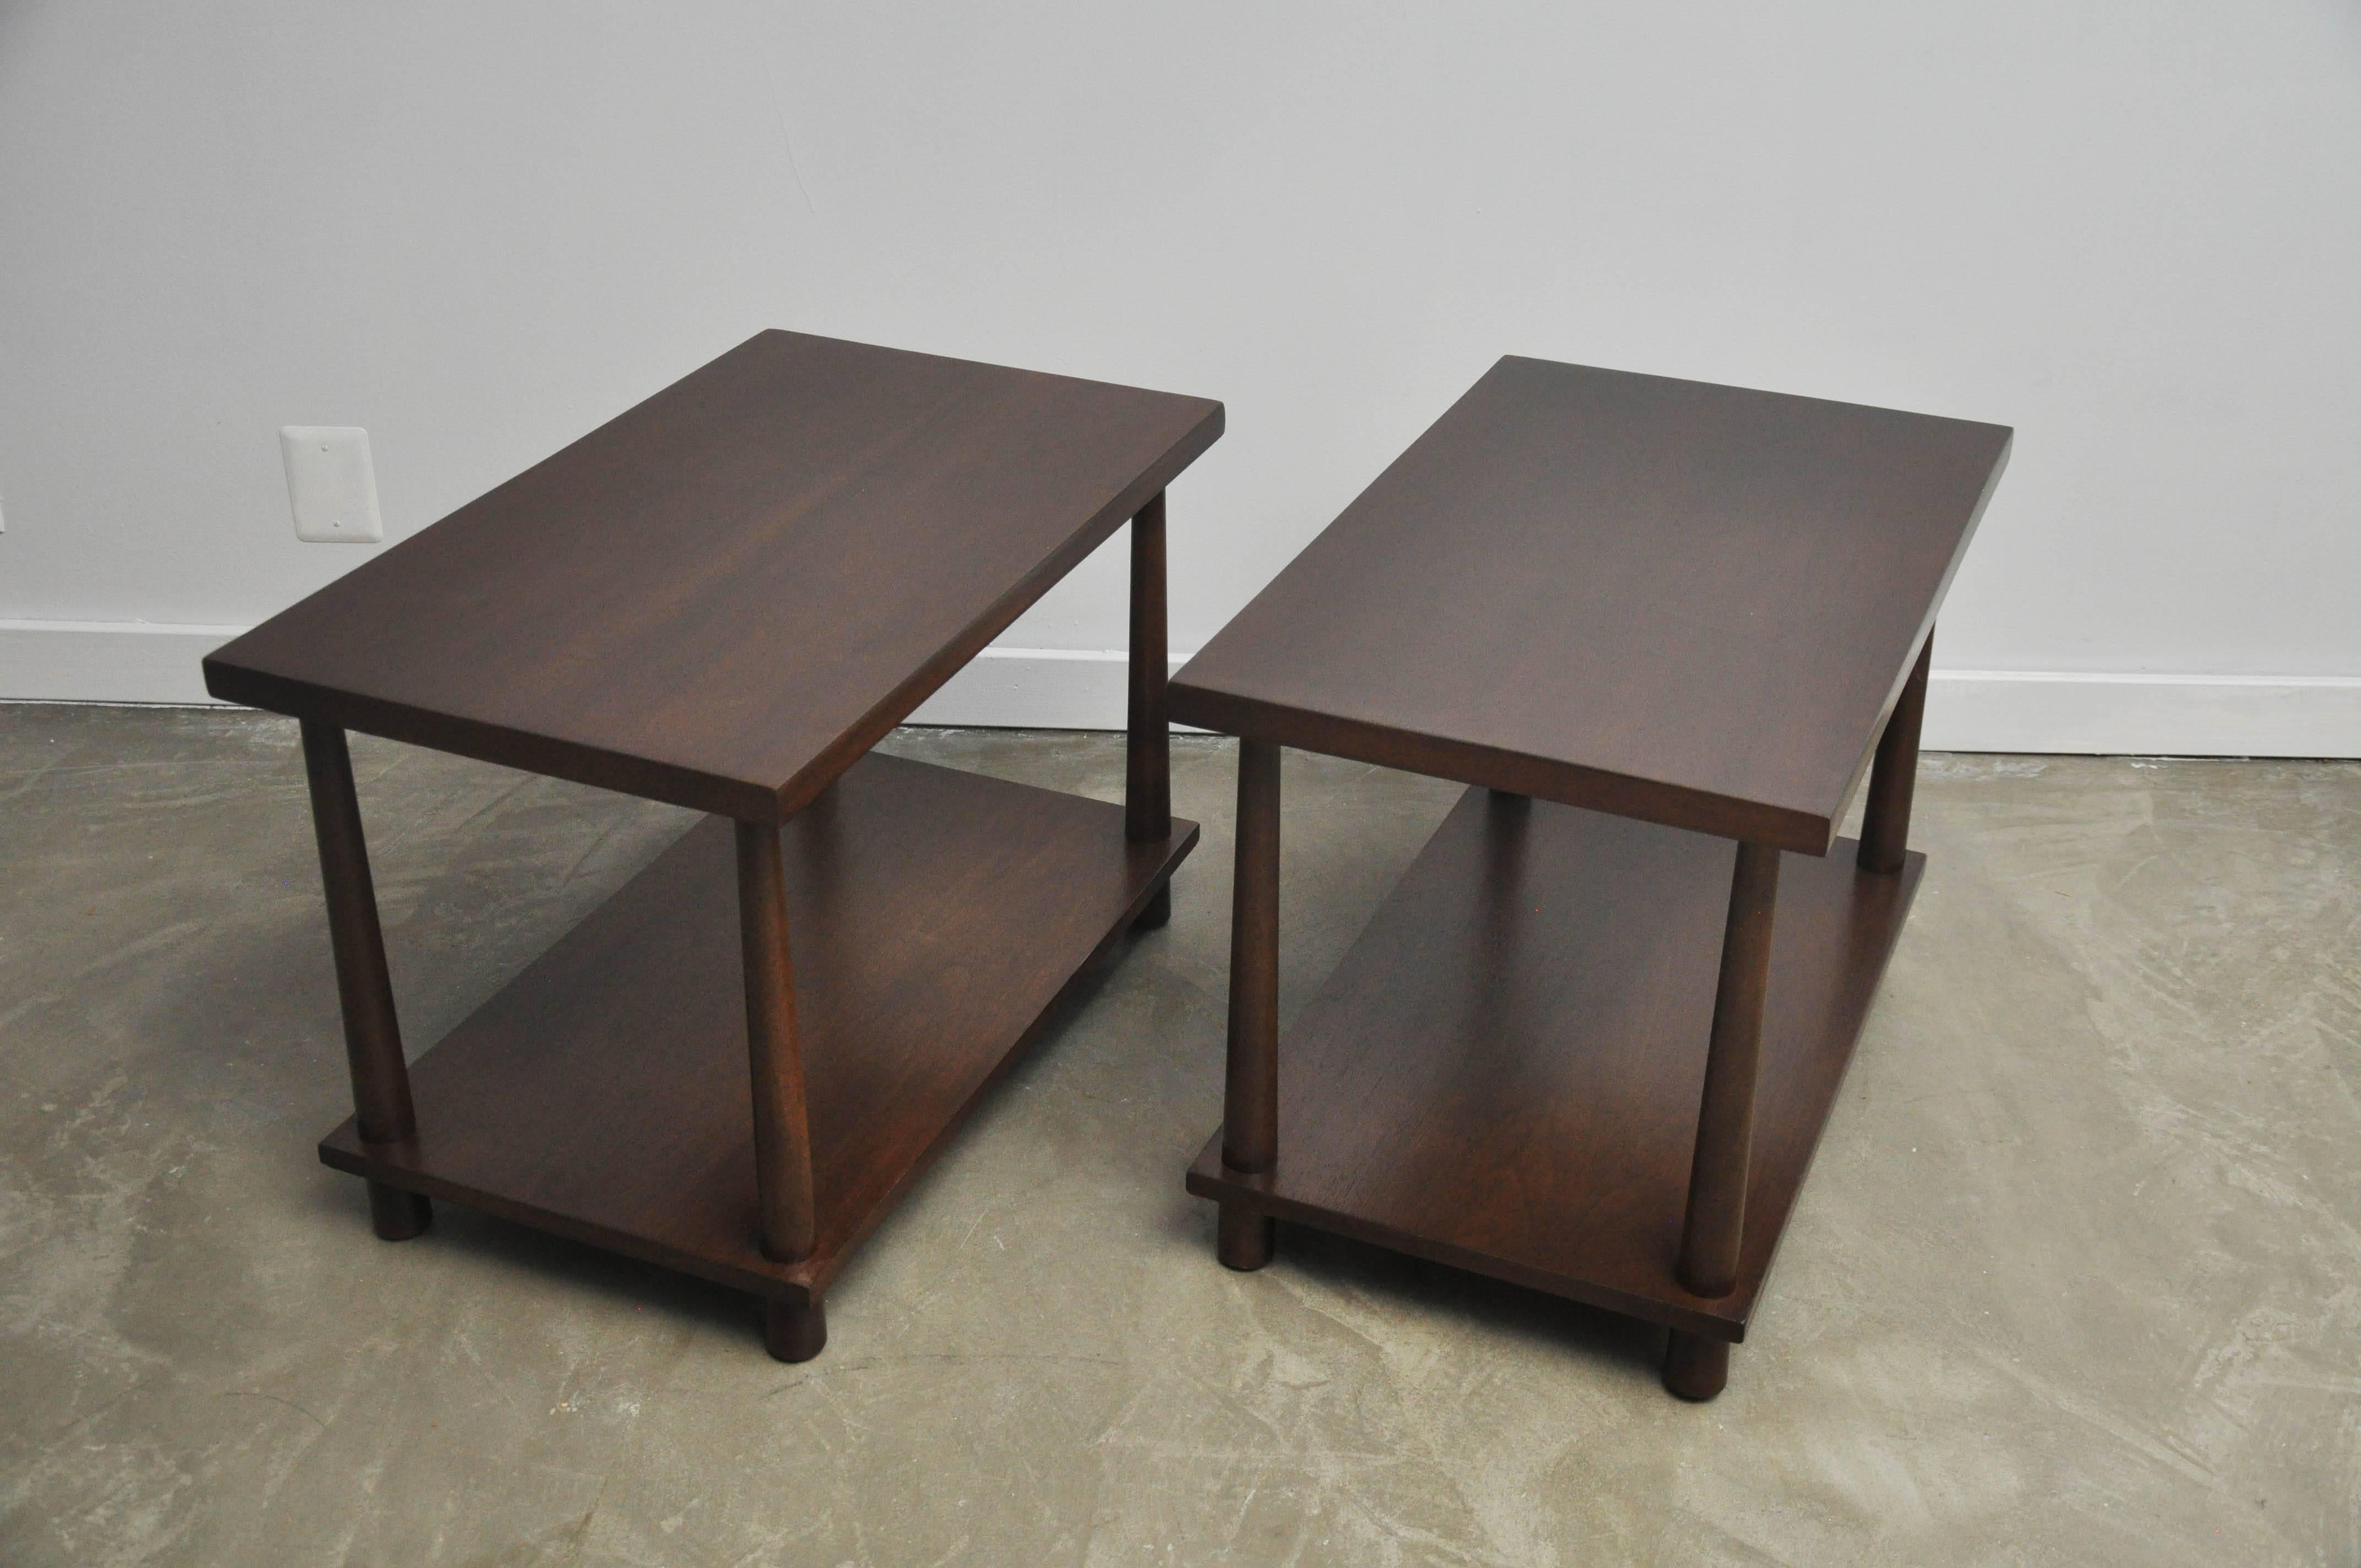 Pair of refinished dark walnut finish end tables by TH Robsjohn-Gibbings.